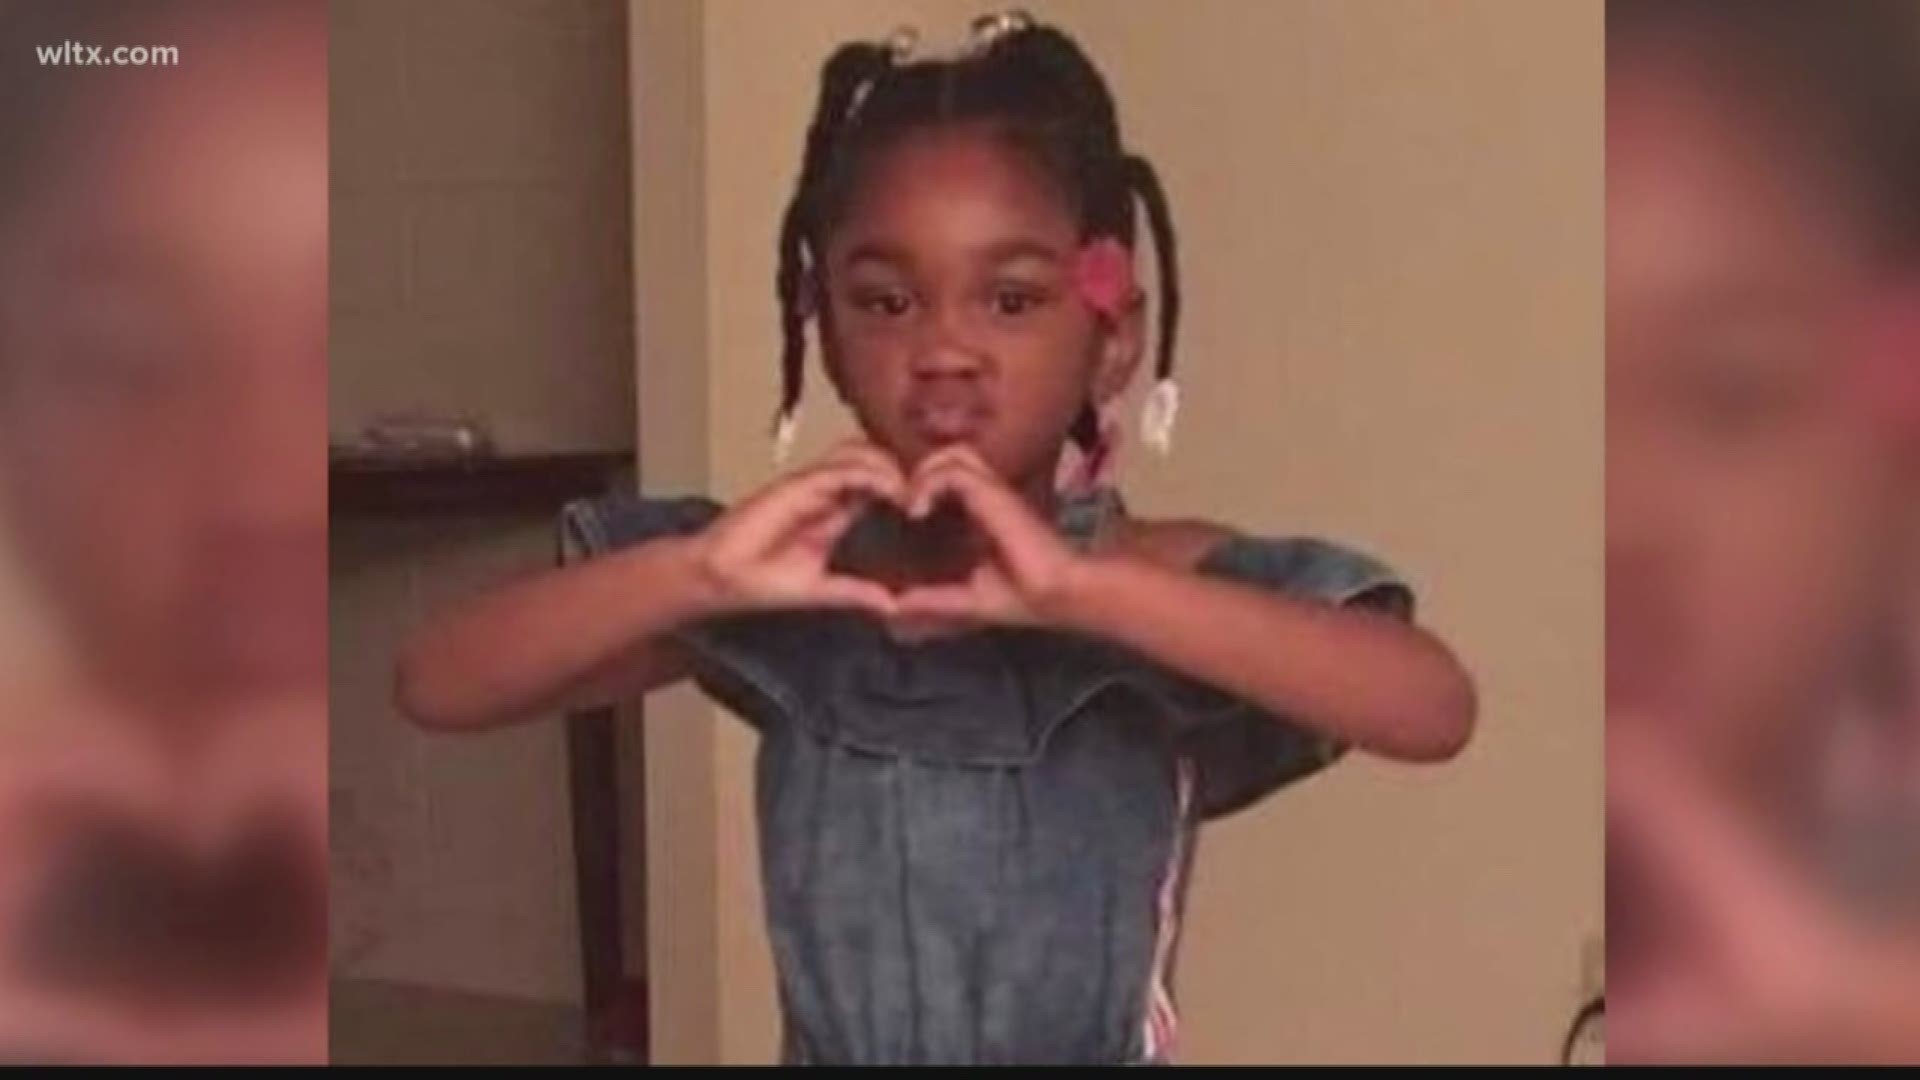 Nevaeh Adams and her mother were killed last month, Sumter police say, by a man they mother knew.